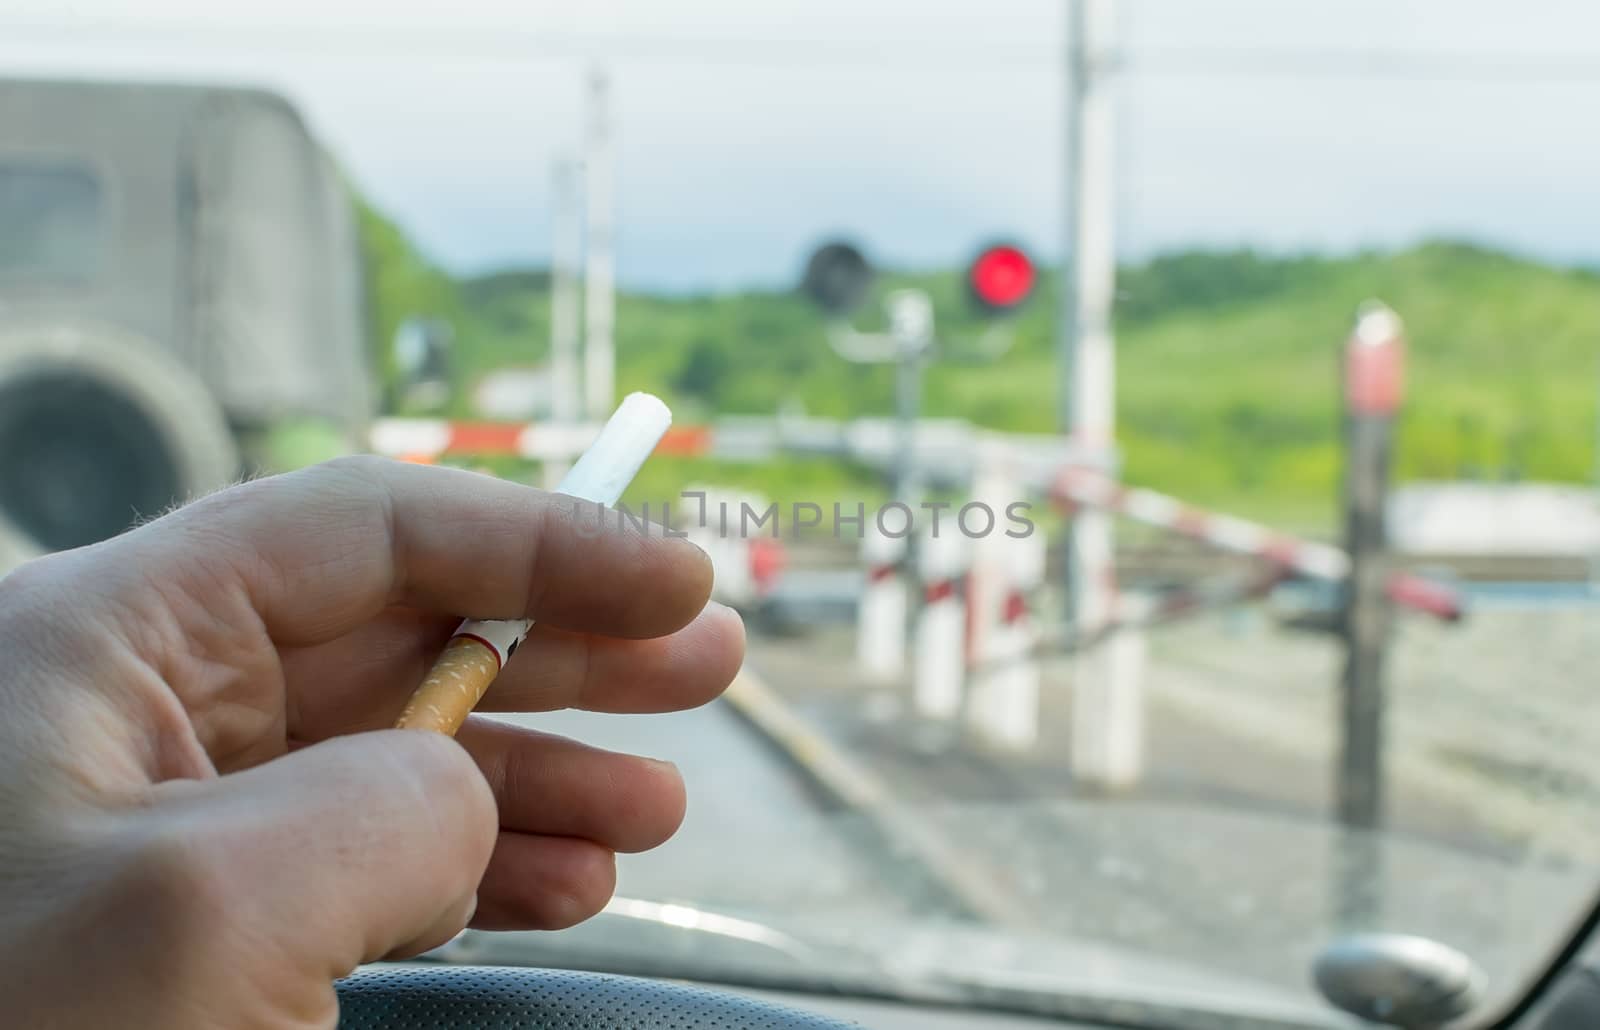 View of the driver hand with a cigarette on the steering wheel of the car, which stopped before a closed railway crossing at a red light by jk3030